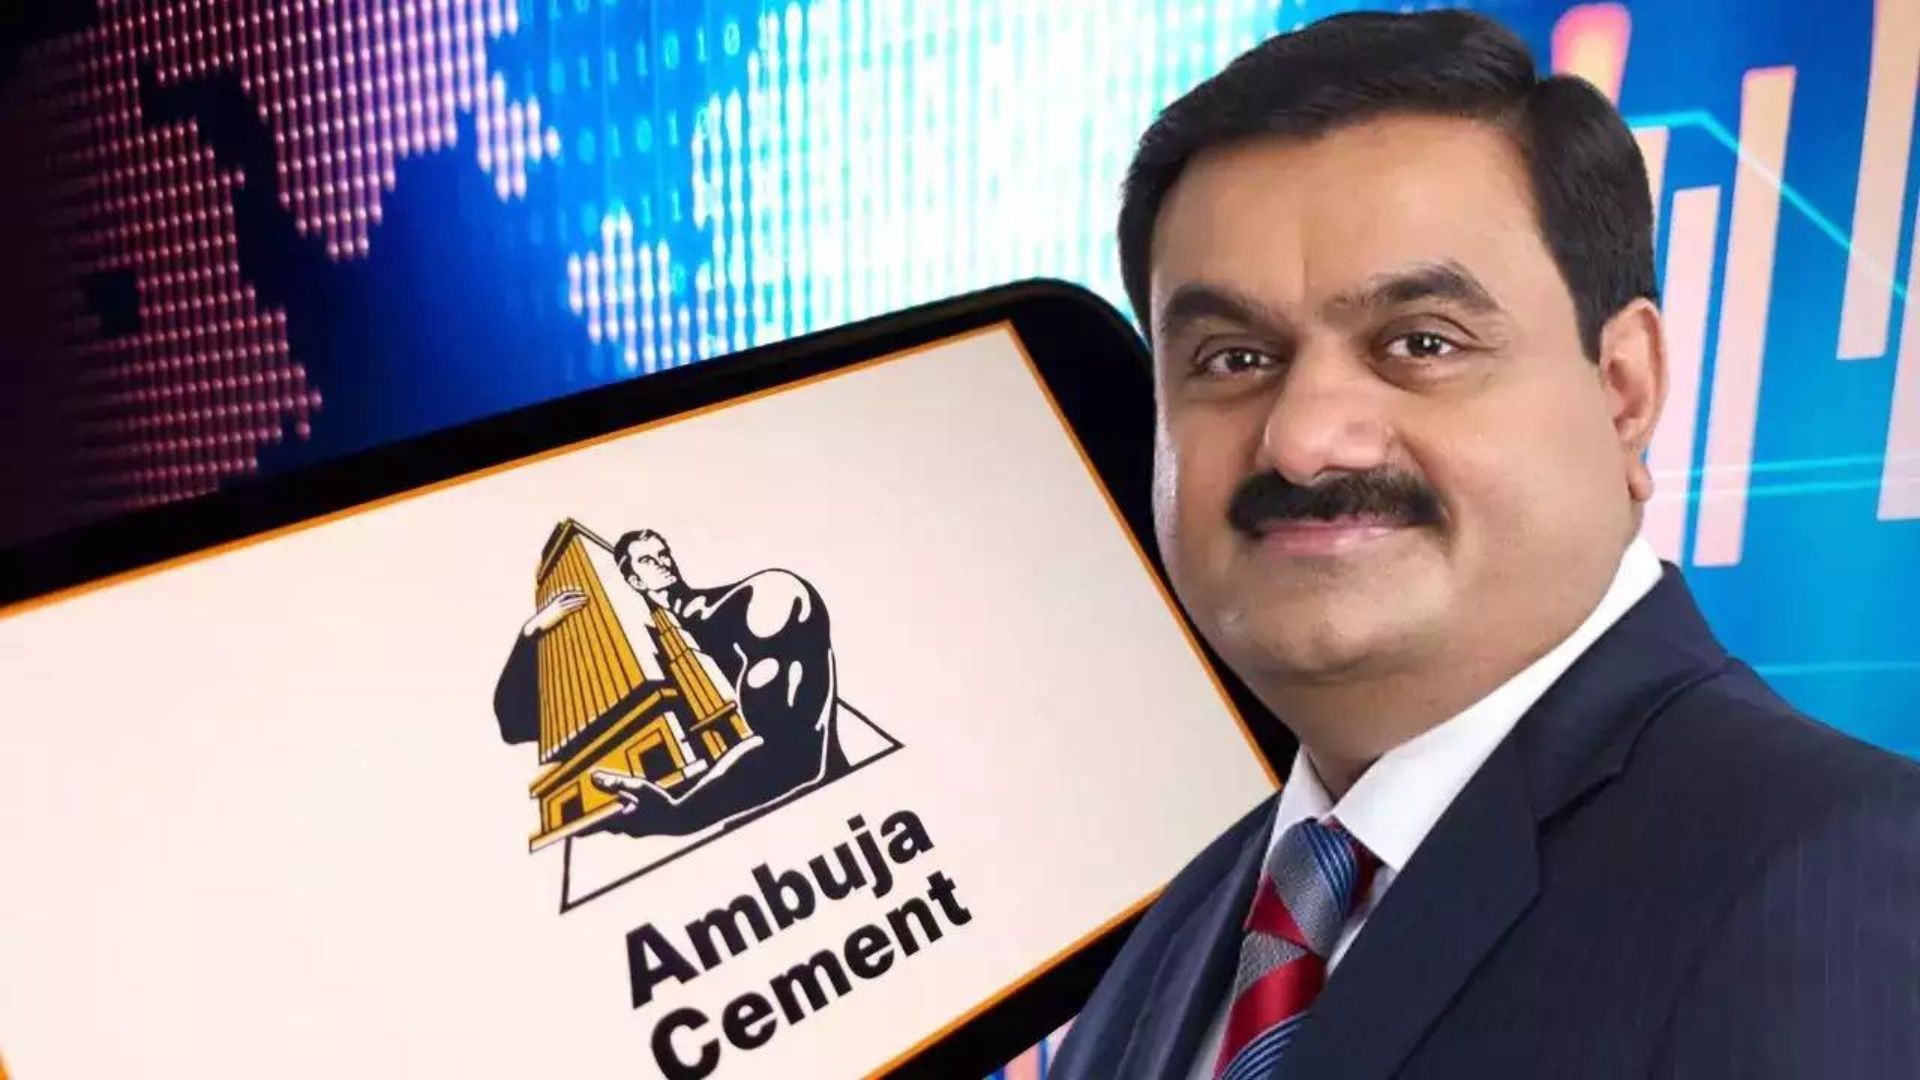 Adani Group Injects Rs 8,339 Crore into Ambuja Cements, Raises Stake to 70.3%